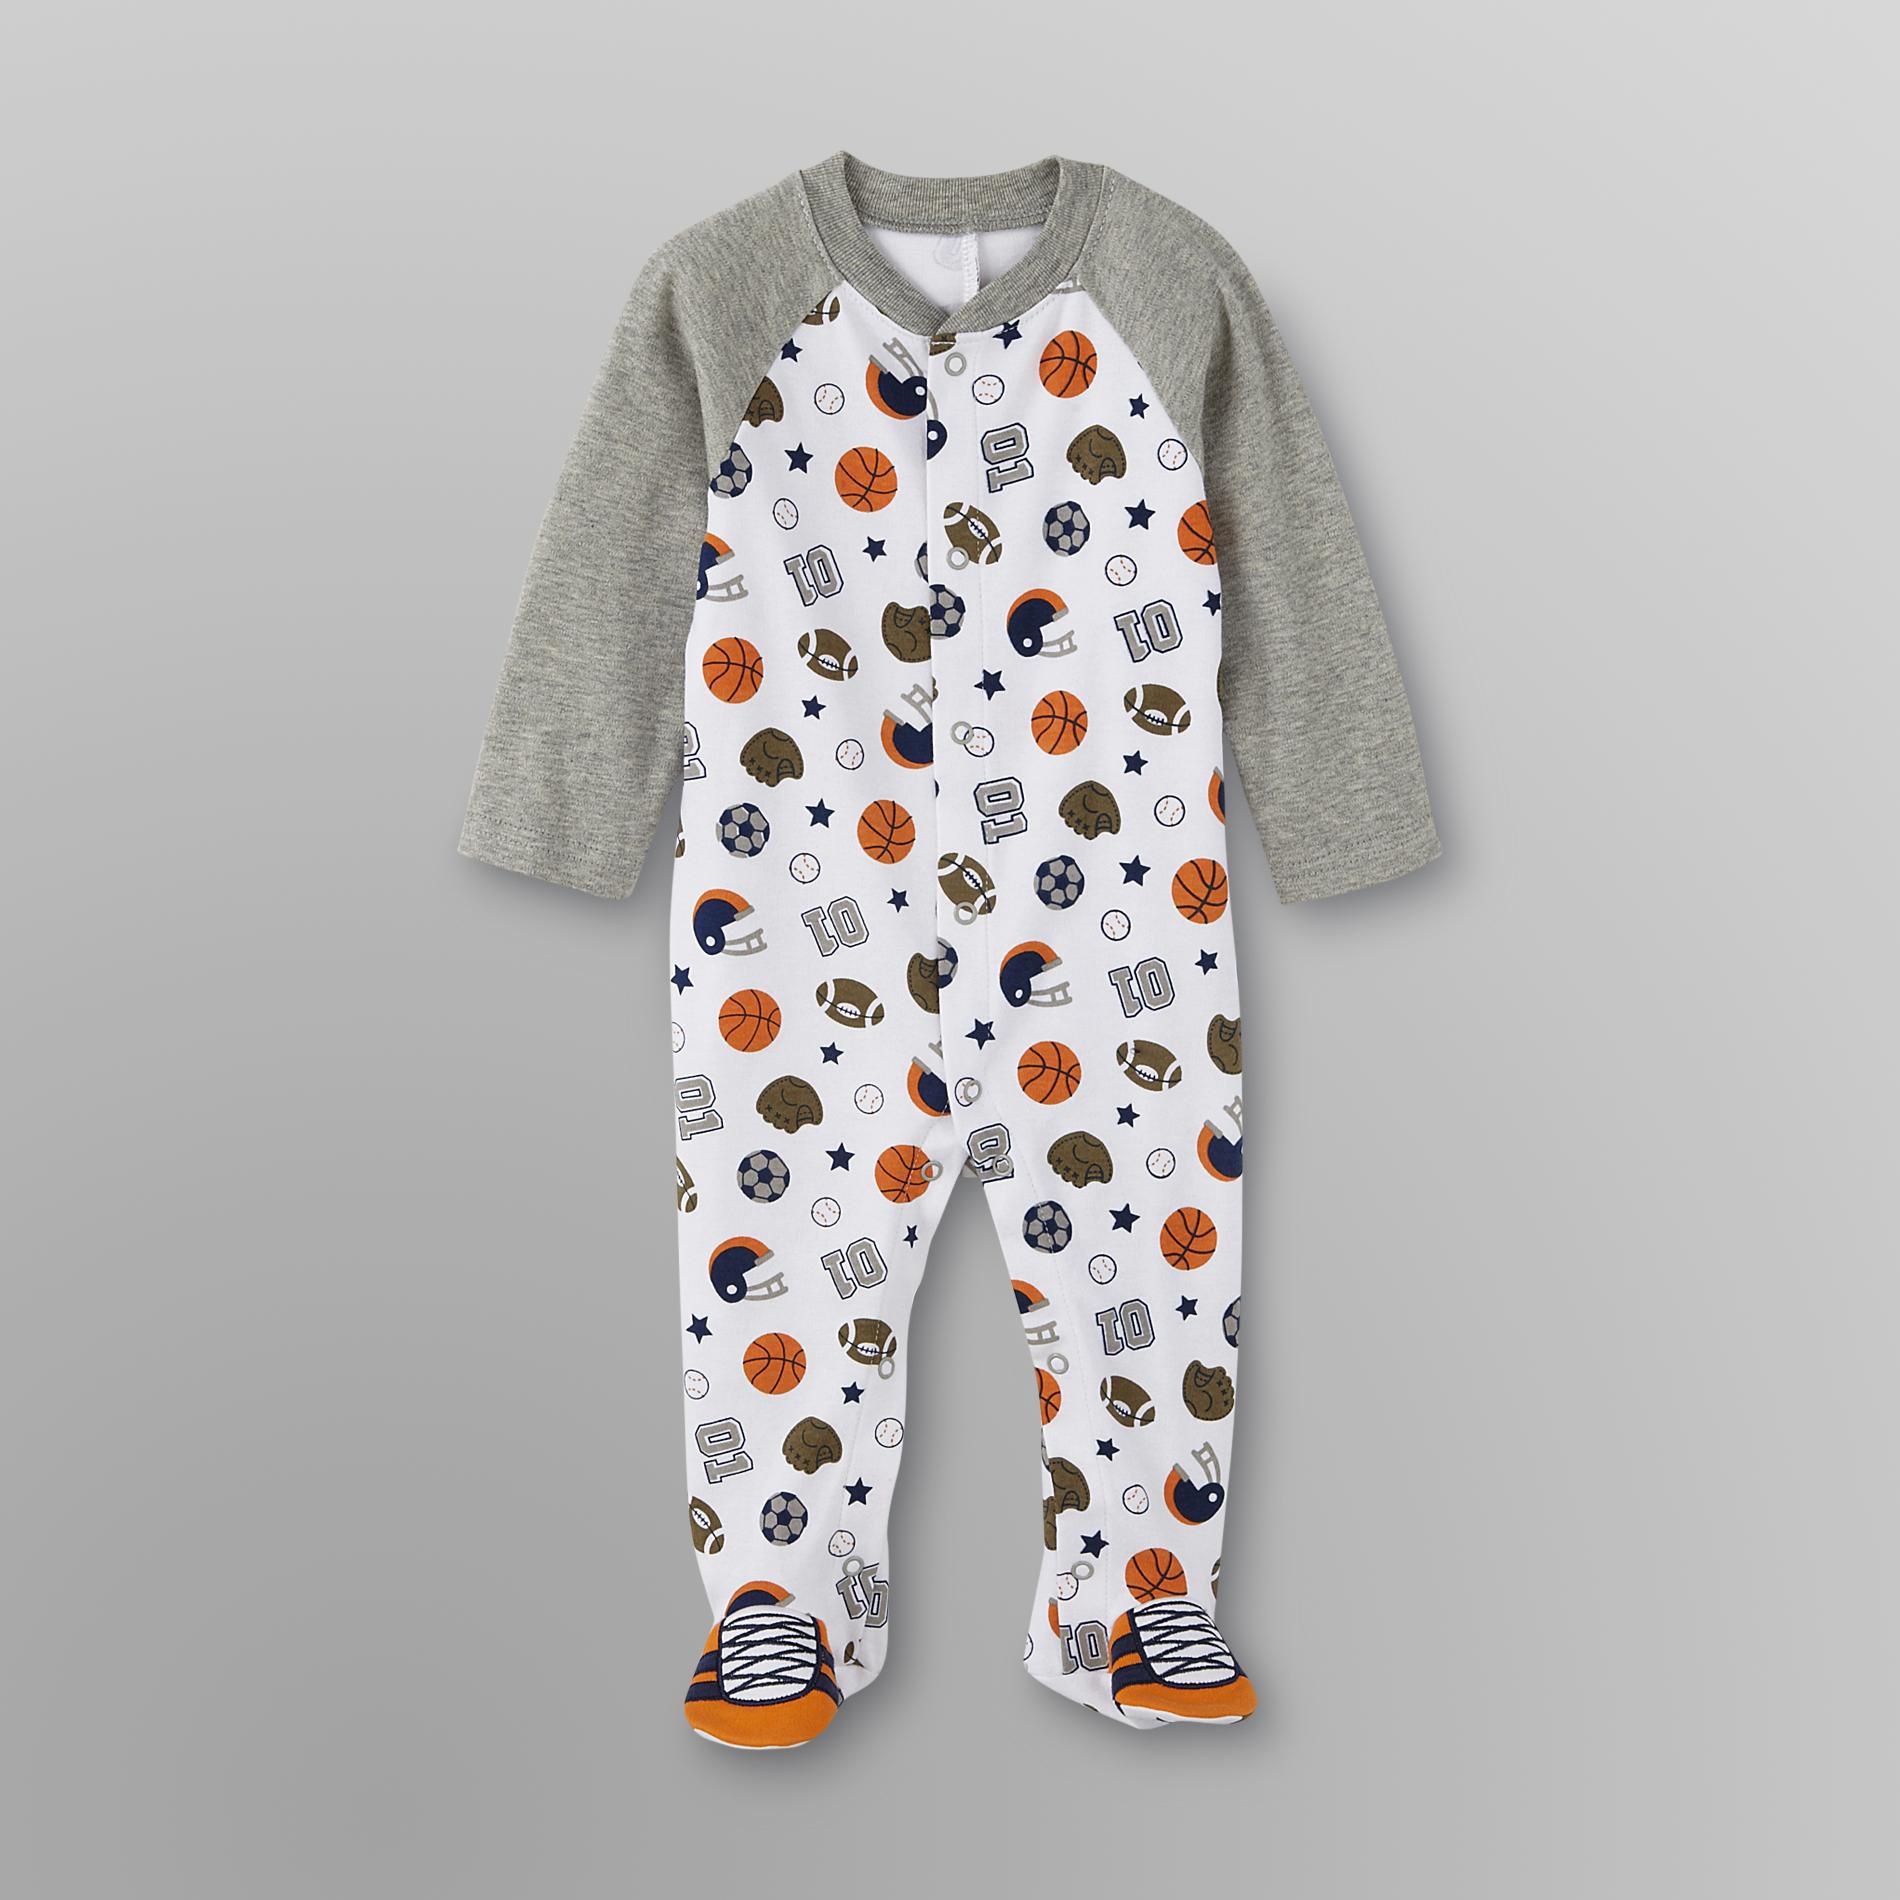 Little Wonders Infant Boy's Footed Pajamas